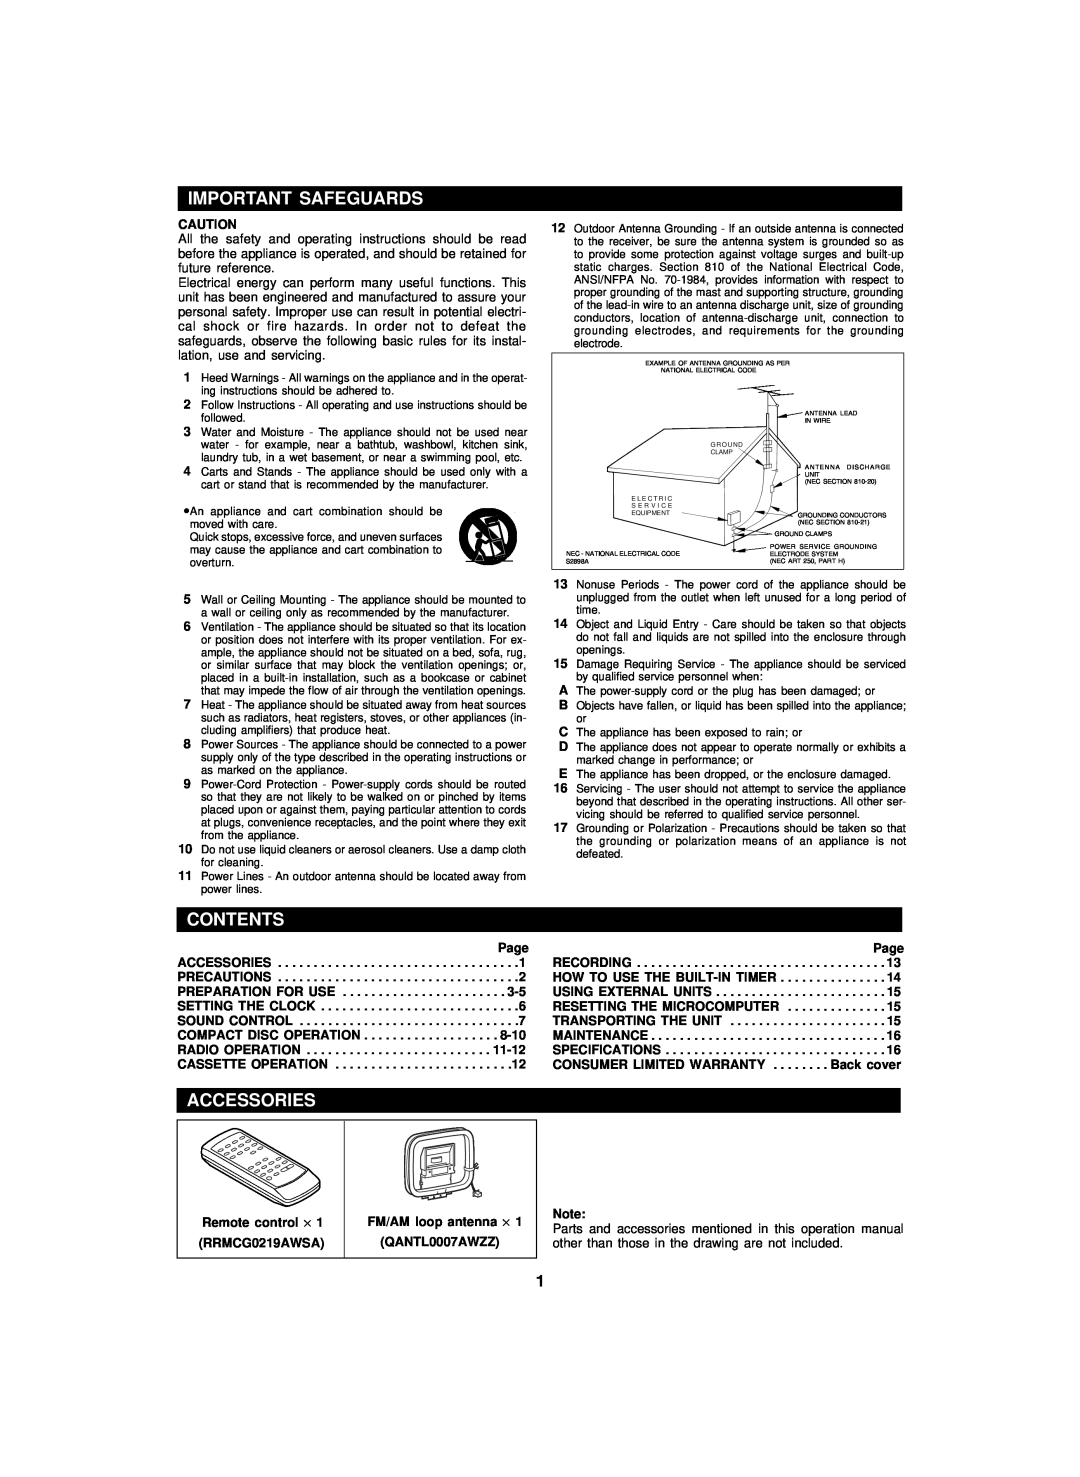 Sharp CD-BA2100 operation manual Important Safeguards, Contents, Accessories, Remote control × RRMCG0219AWSA 